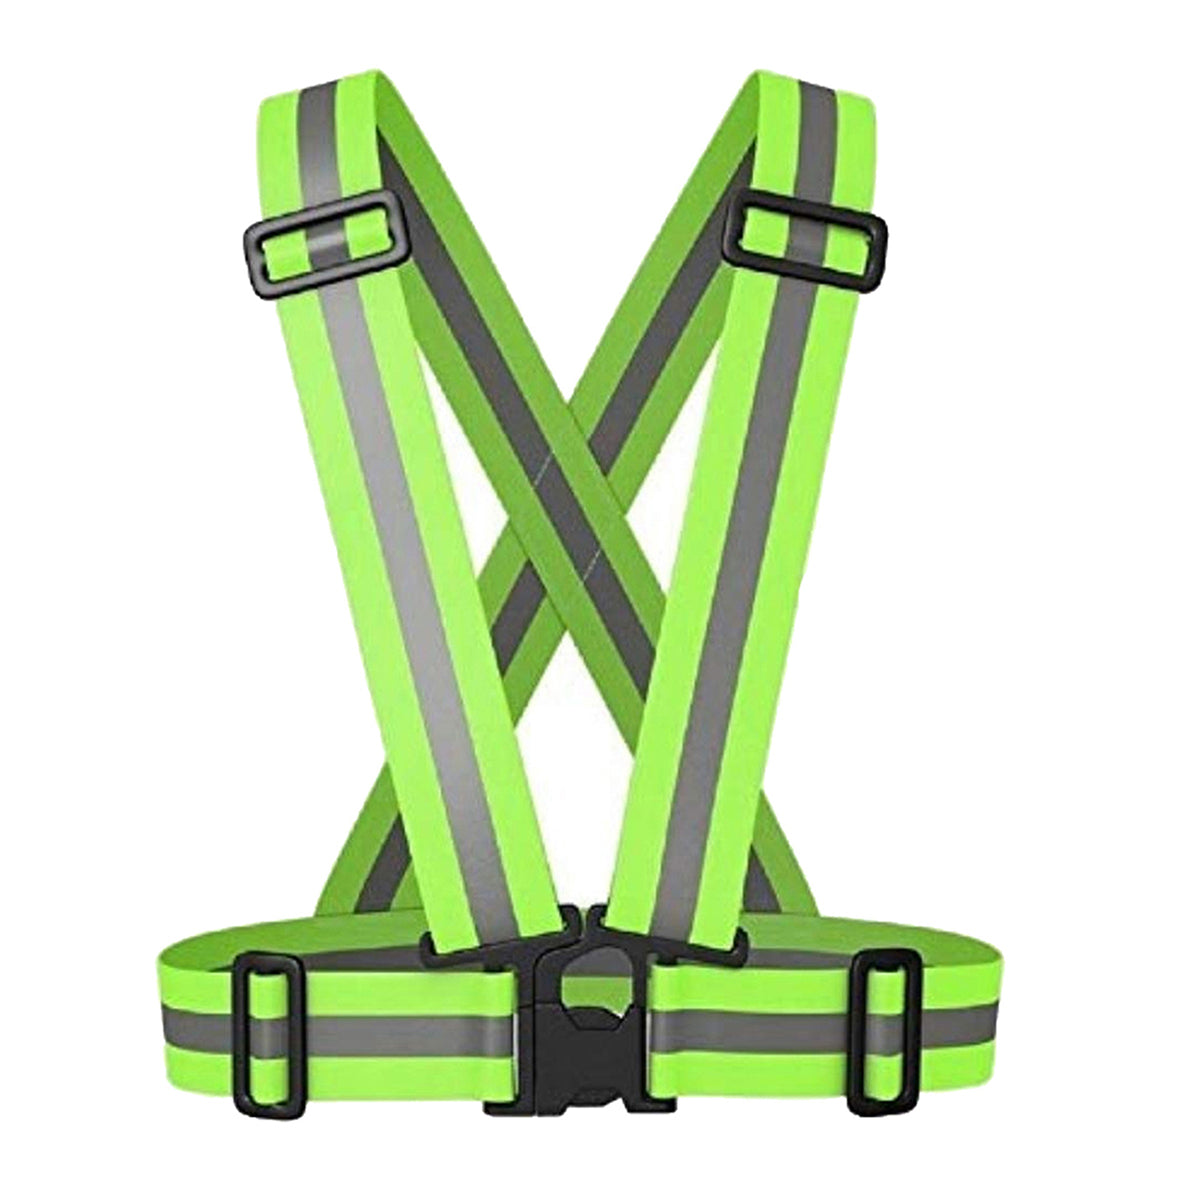 Safety Reflective Vest for Outdoors and Biking - Green Color LifeKrafts